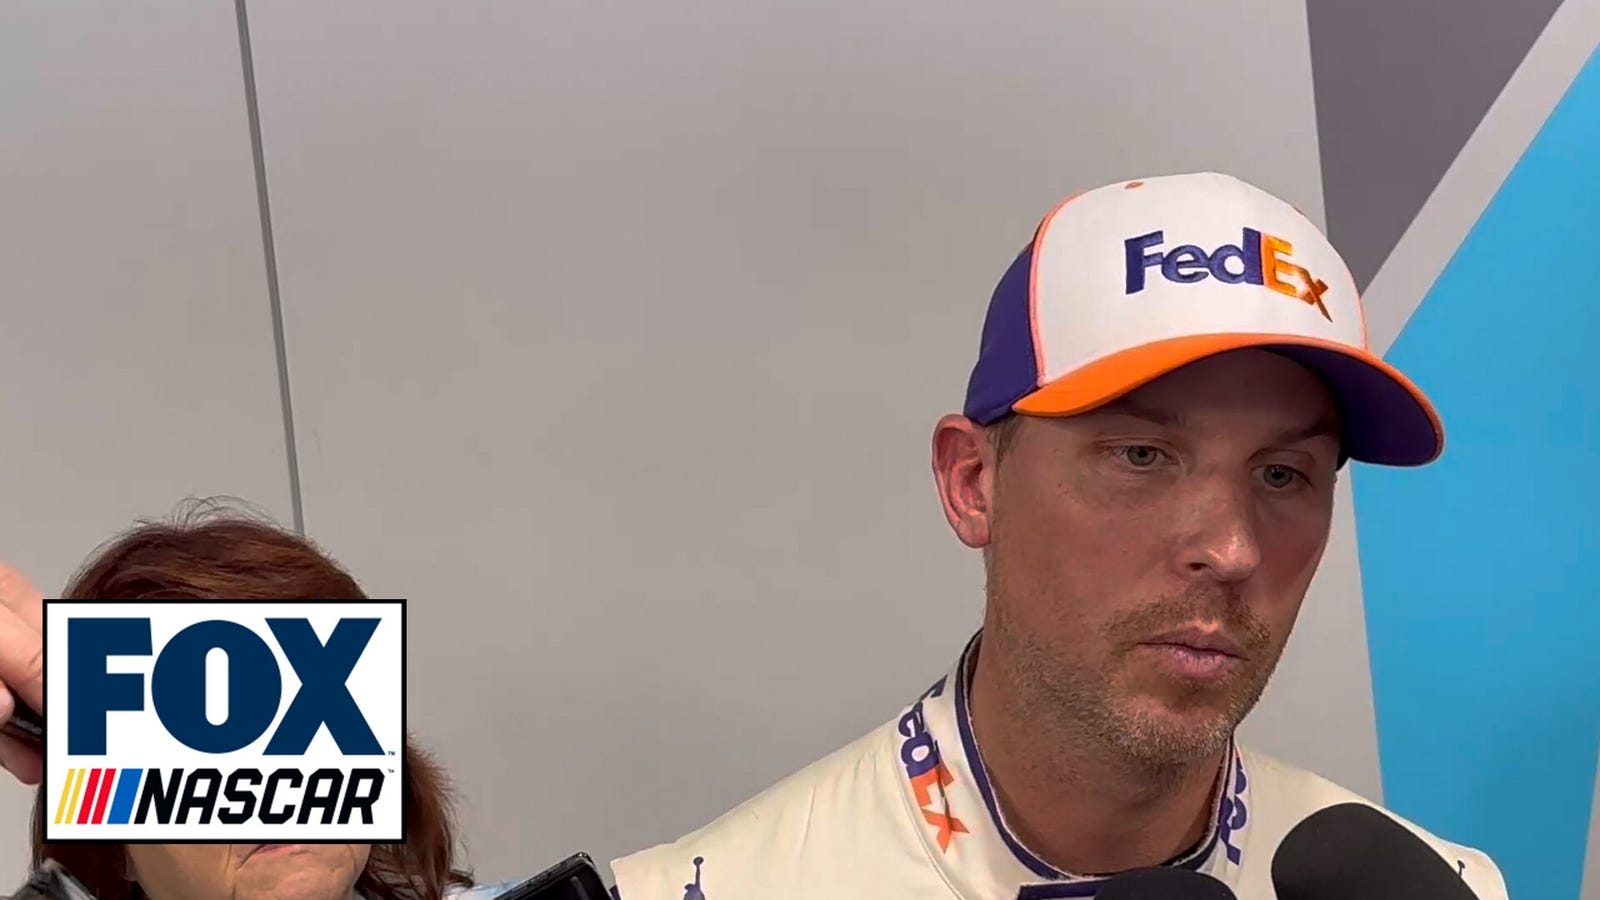 Denny Hamlin shares his thoughts on officiating in NASCAR after Corey Heim's wreck